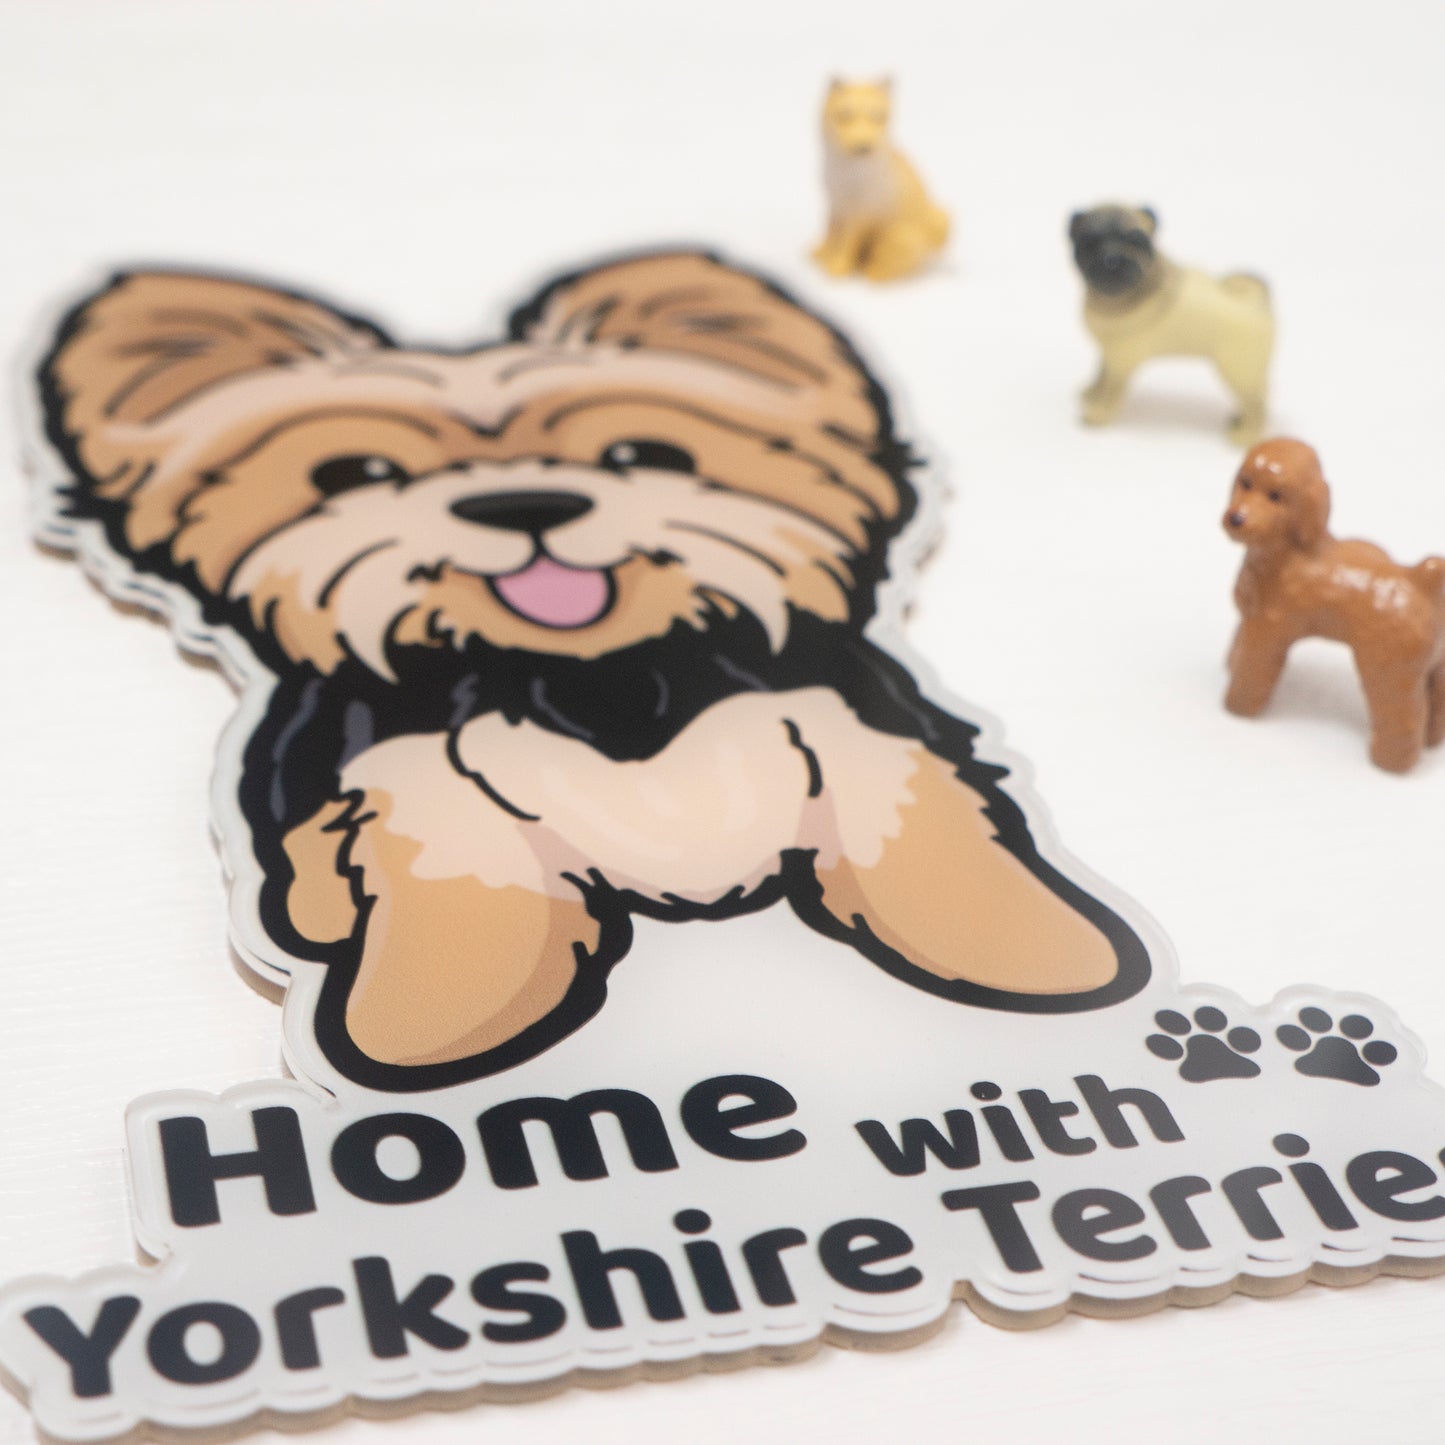 Home with Yorkshire terrier